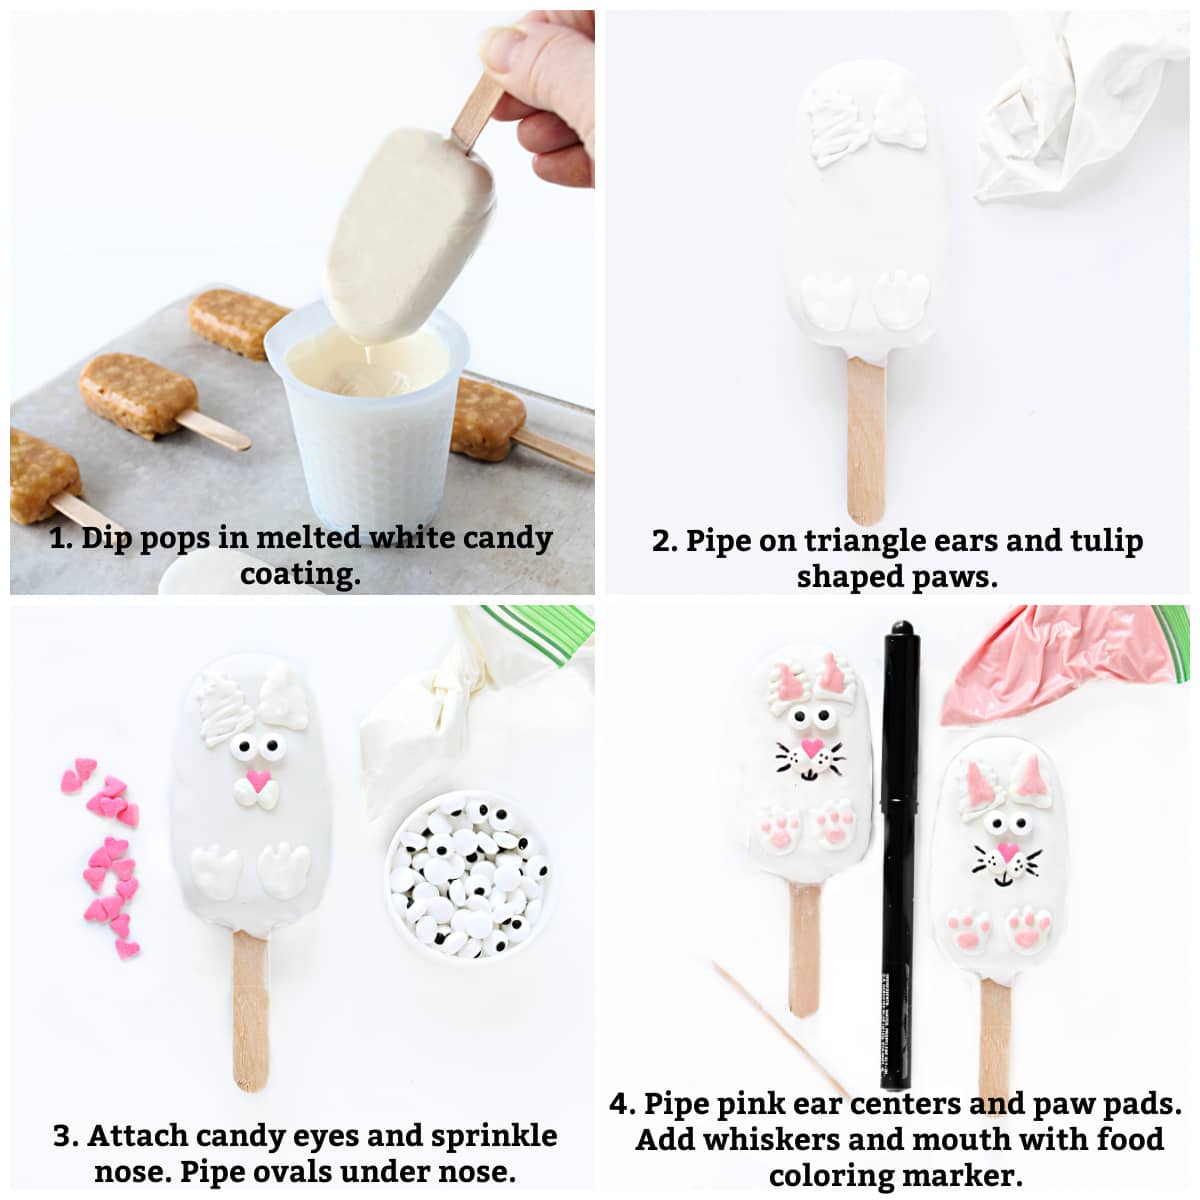 Bunny instructions: coat pops, pipe ears paws, add eyes, nose, cheeks, pipe pink details, draw whiskers.